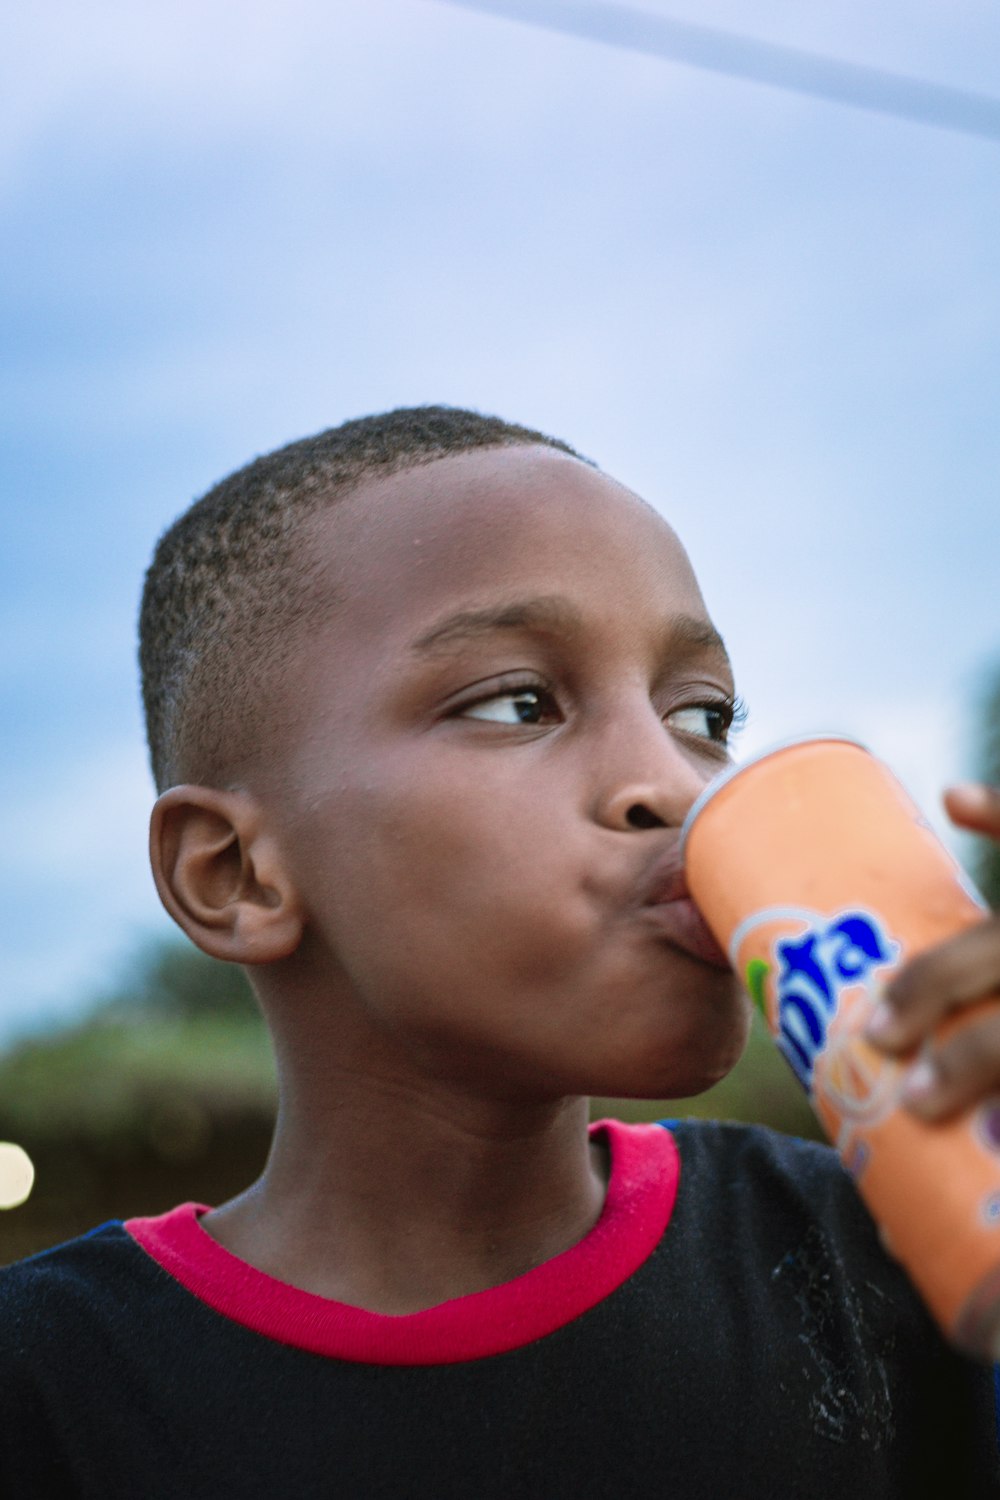 a young boy drinking a bottle of orange juice